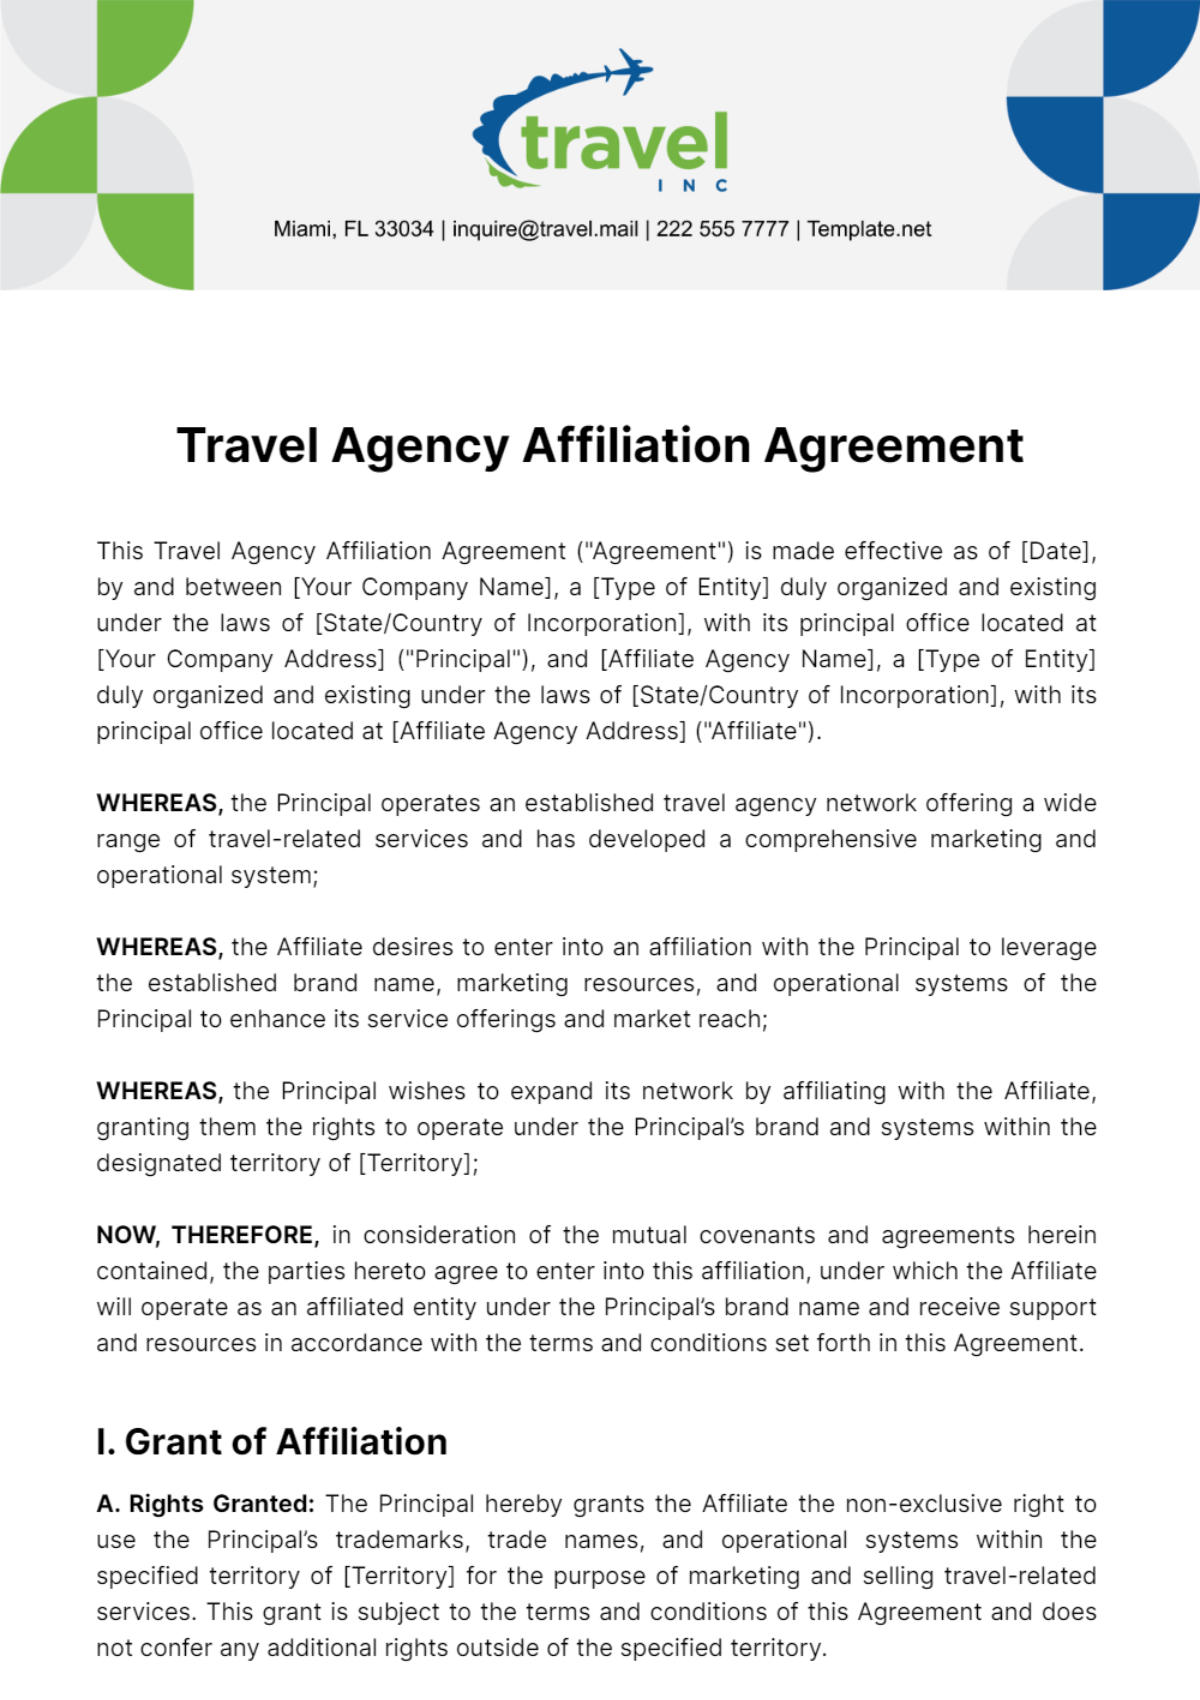 Travel Agency Affiliation Agreement Template